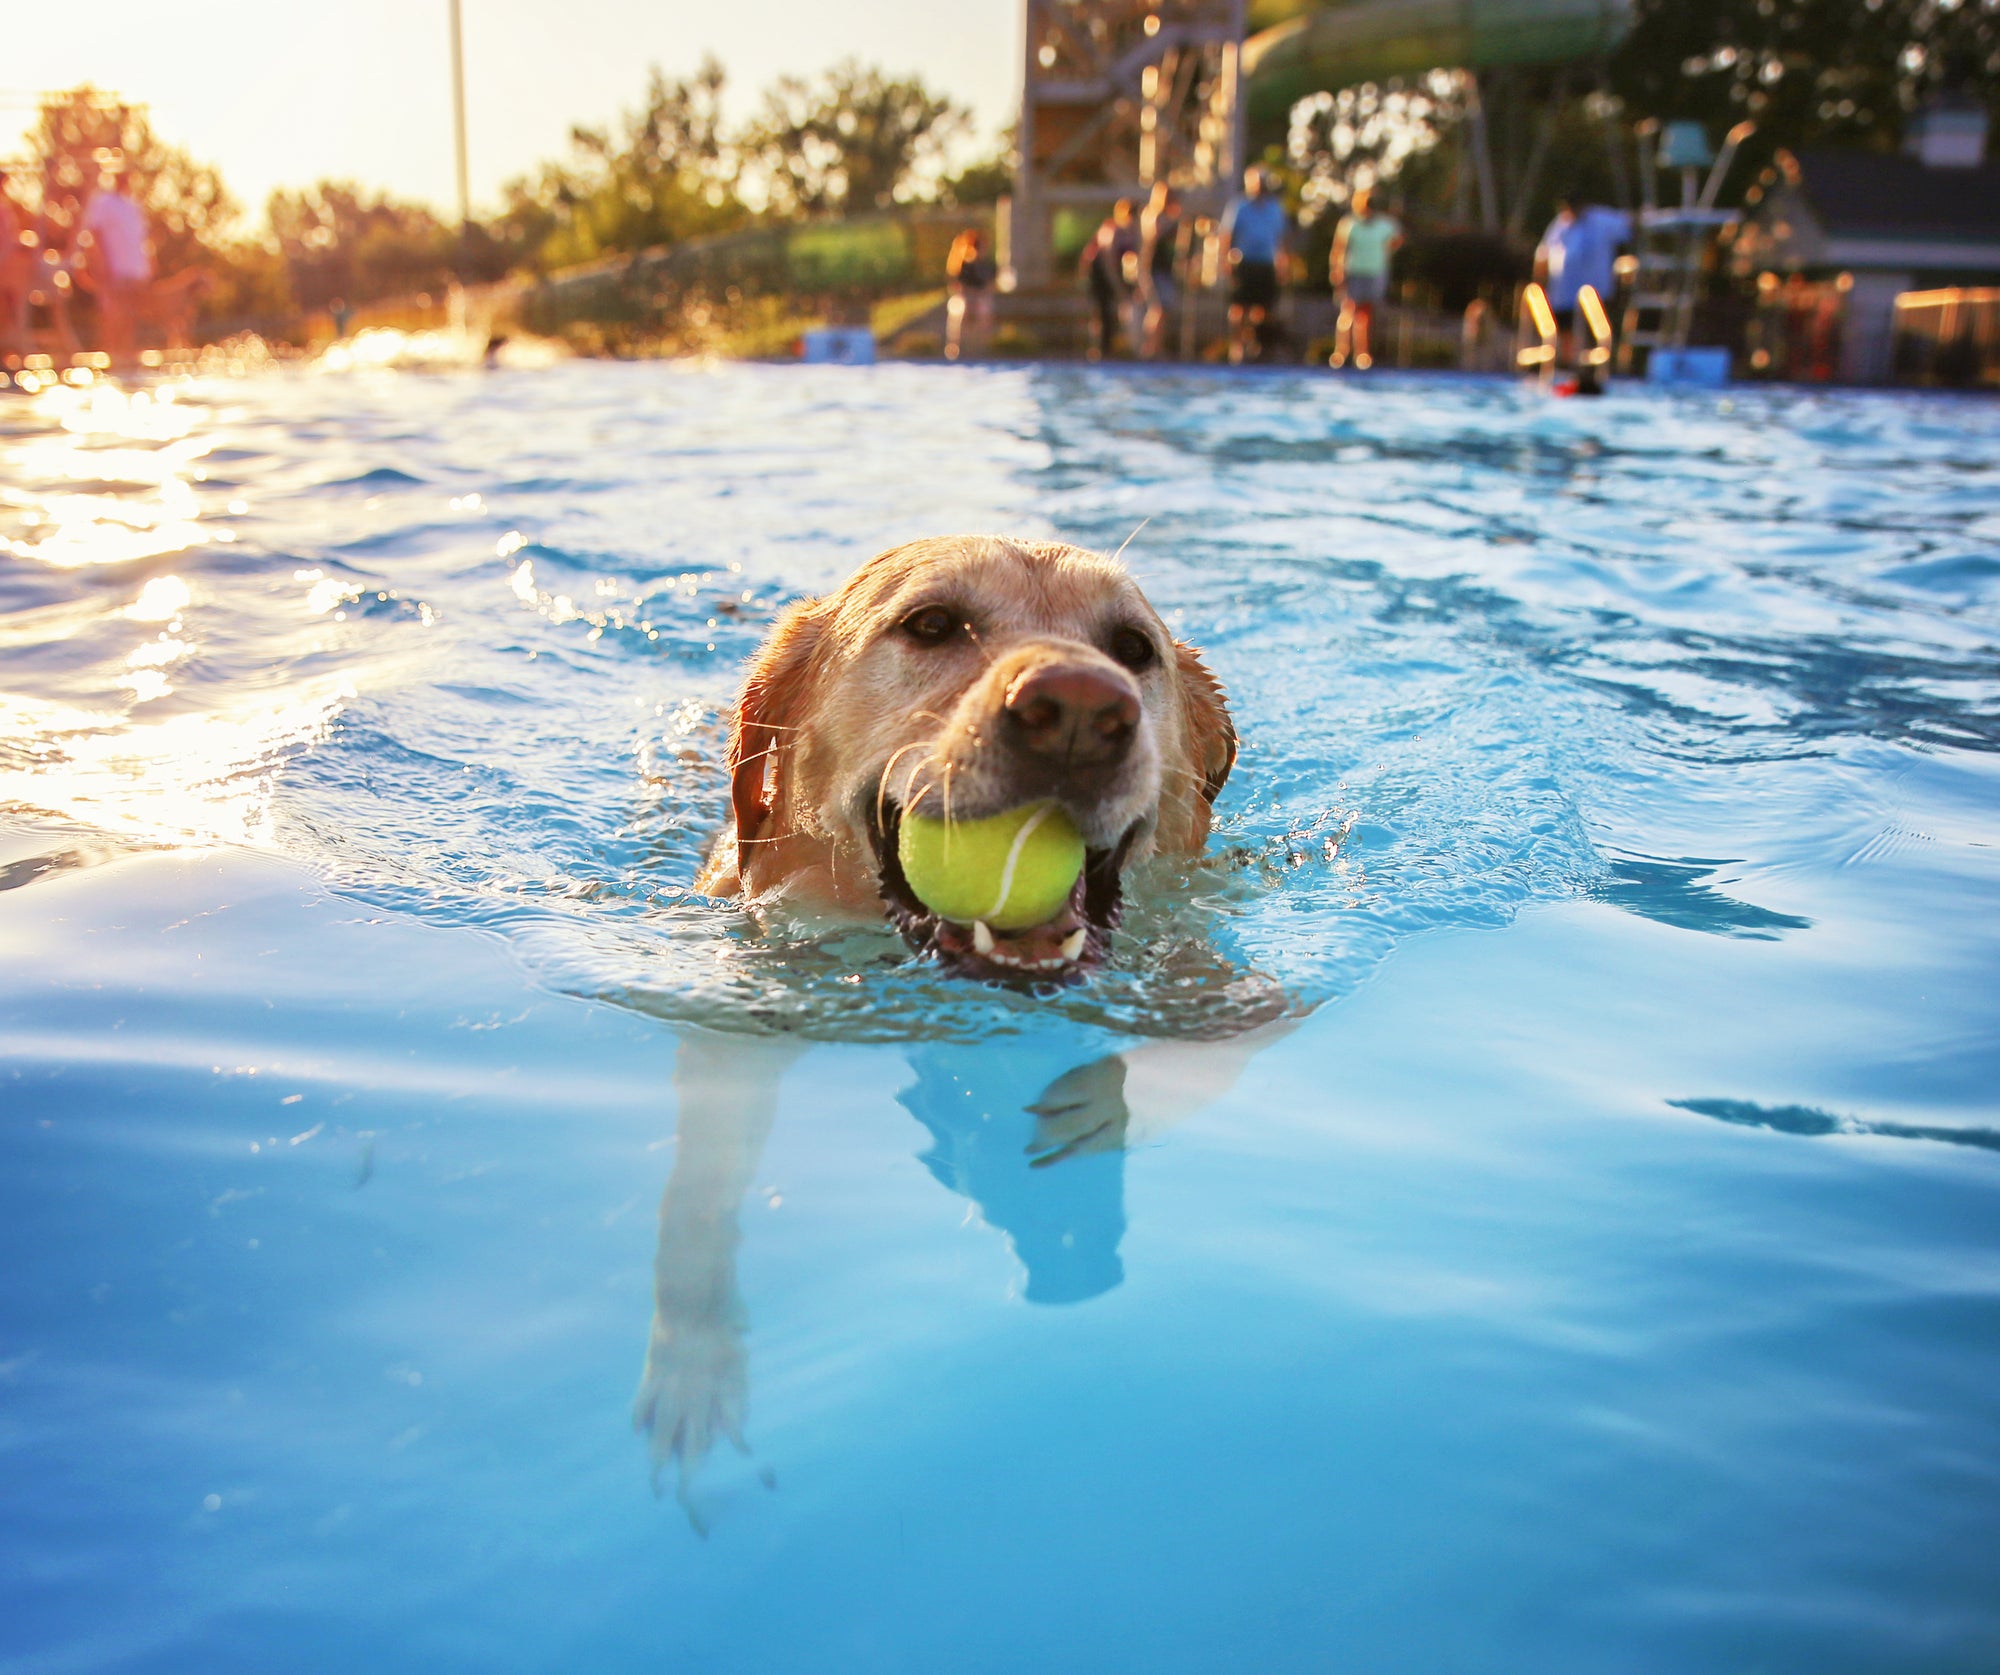 Dog swimming in pool with tennis ball in mouth.